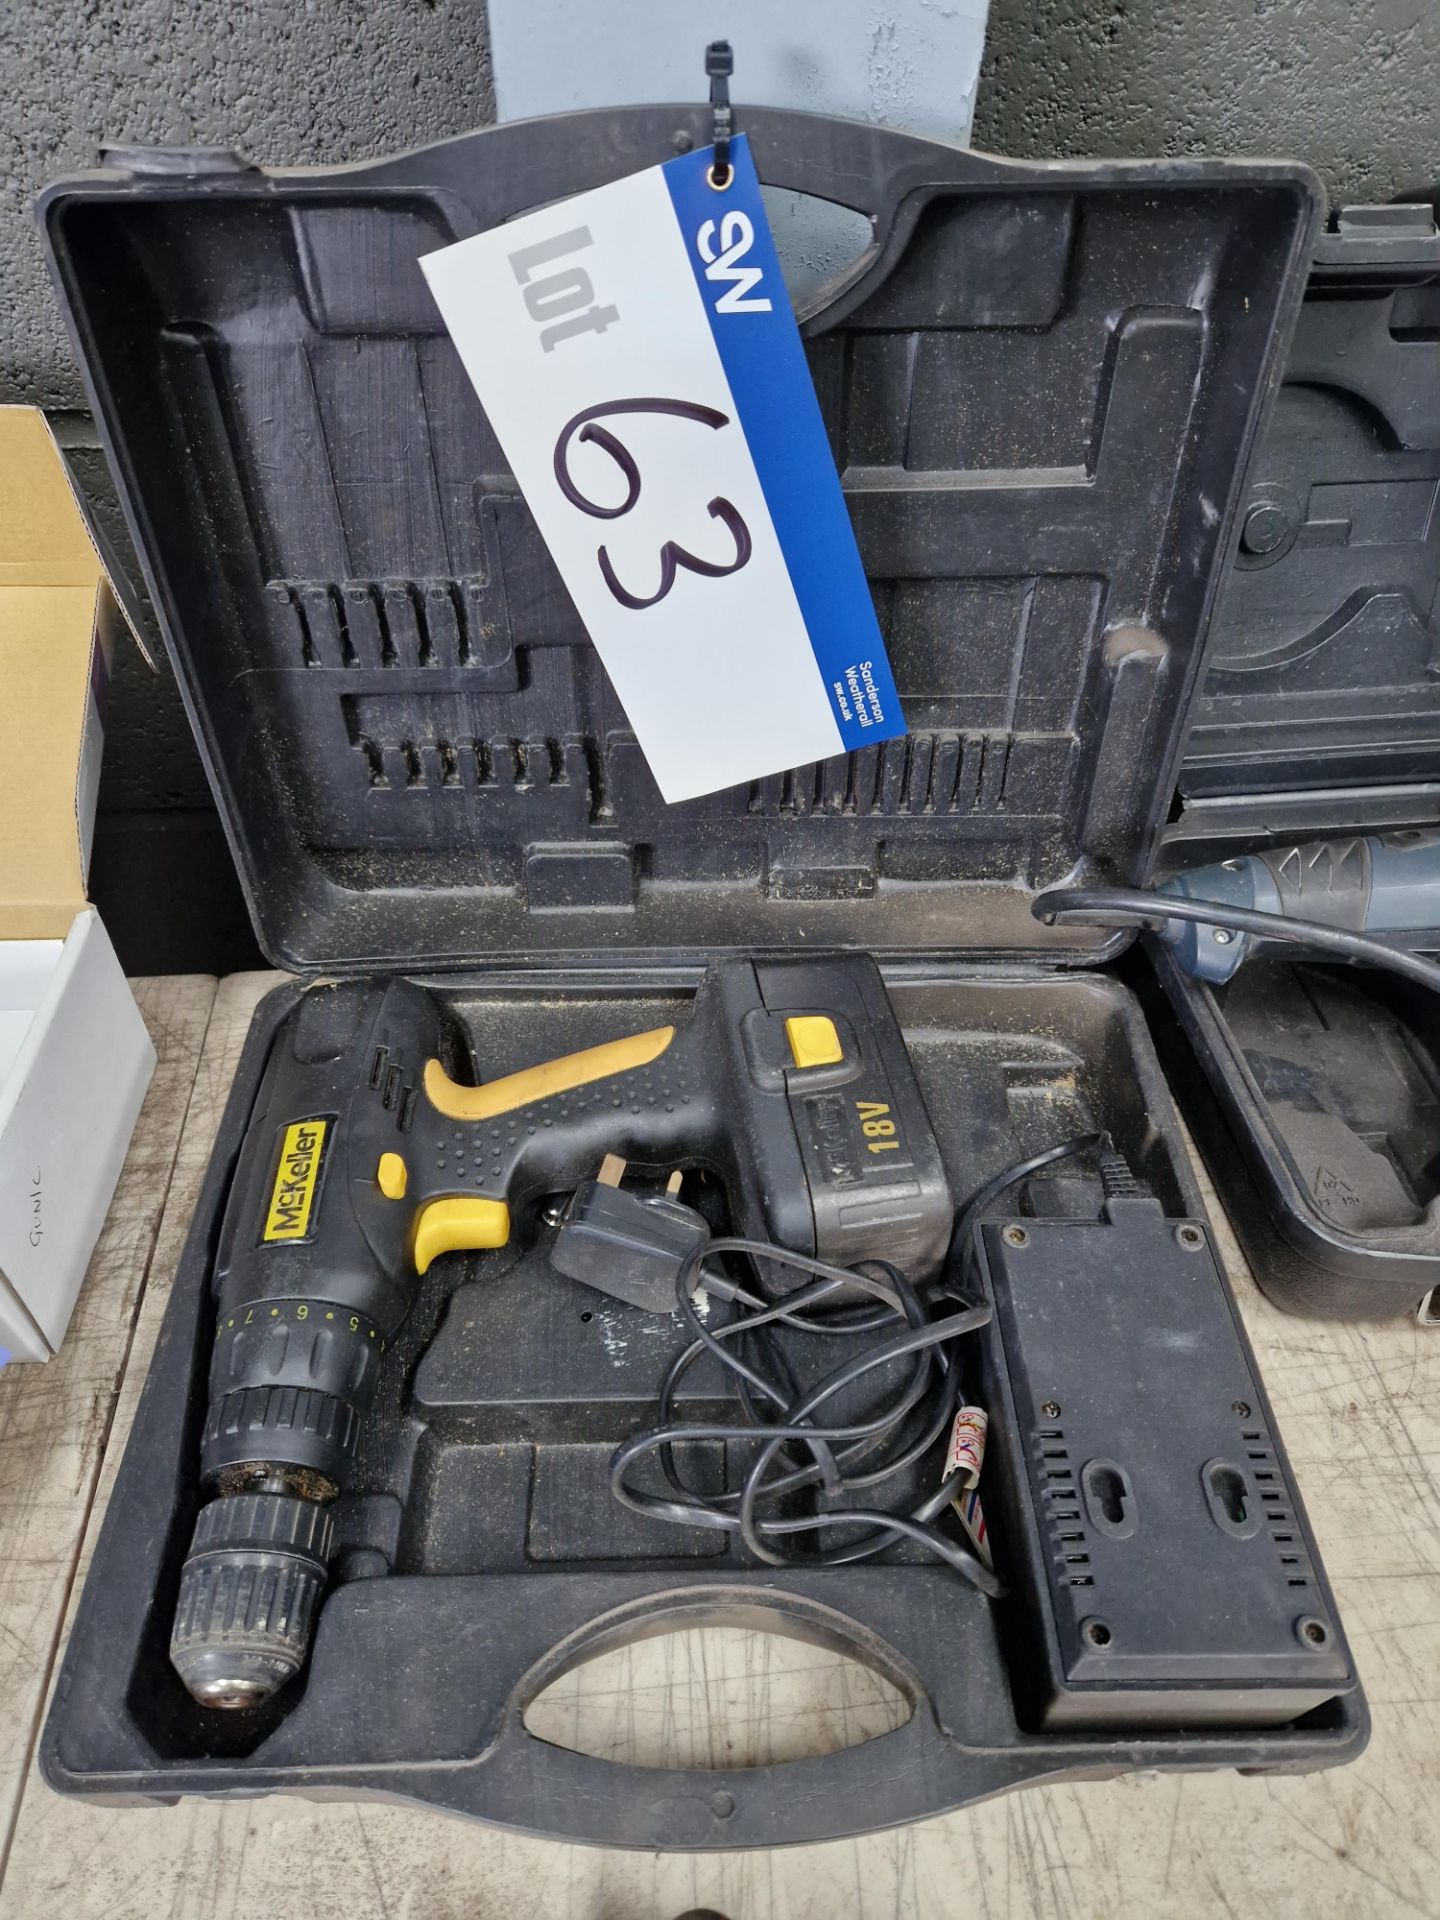 McKELLAR MCKM10 18V Battery Drill, with carry case and chargerPlease read the following important